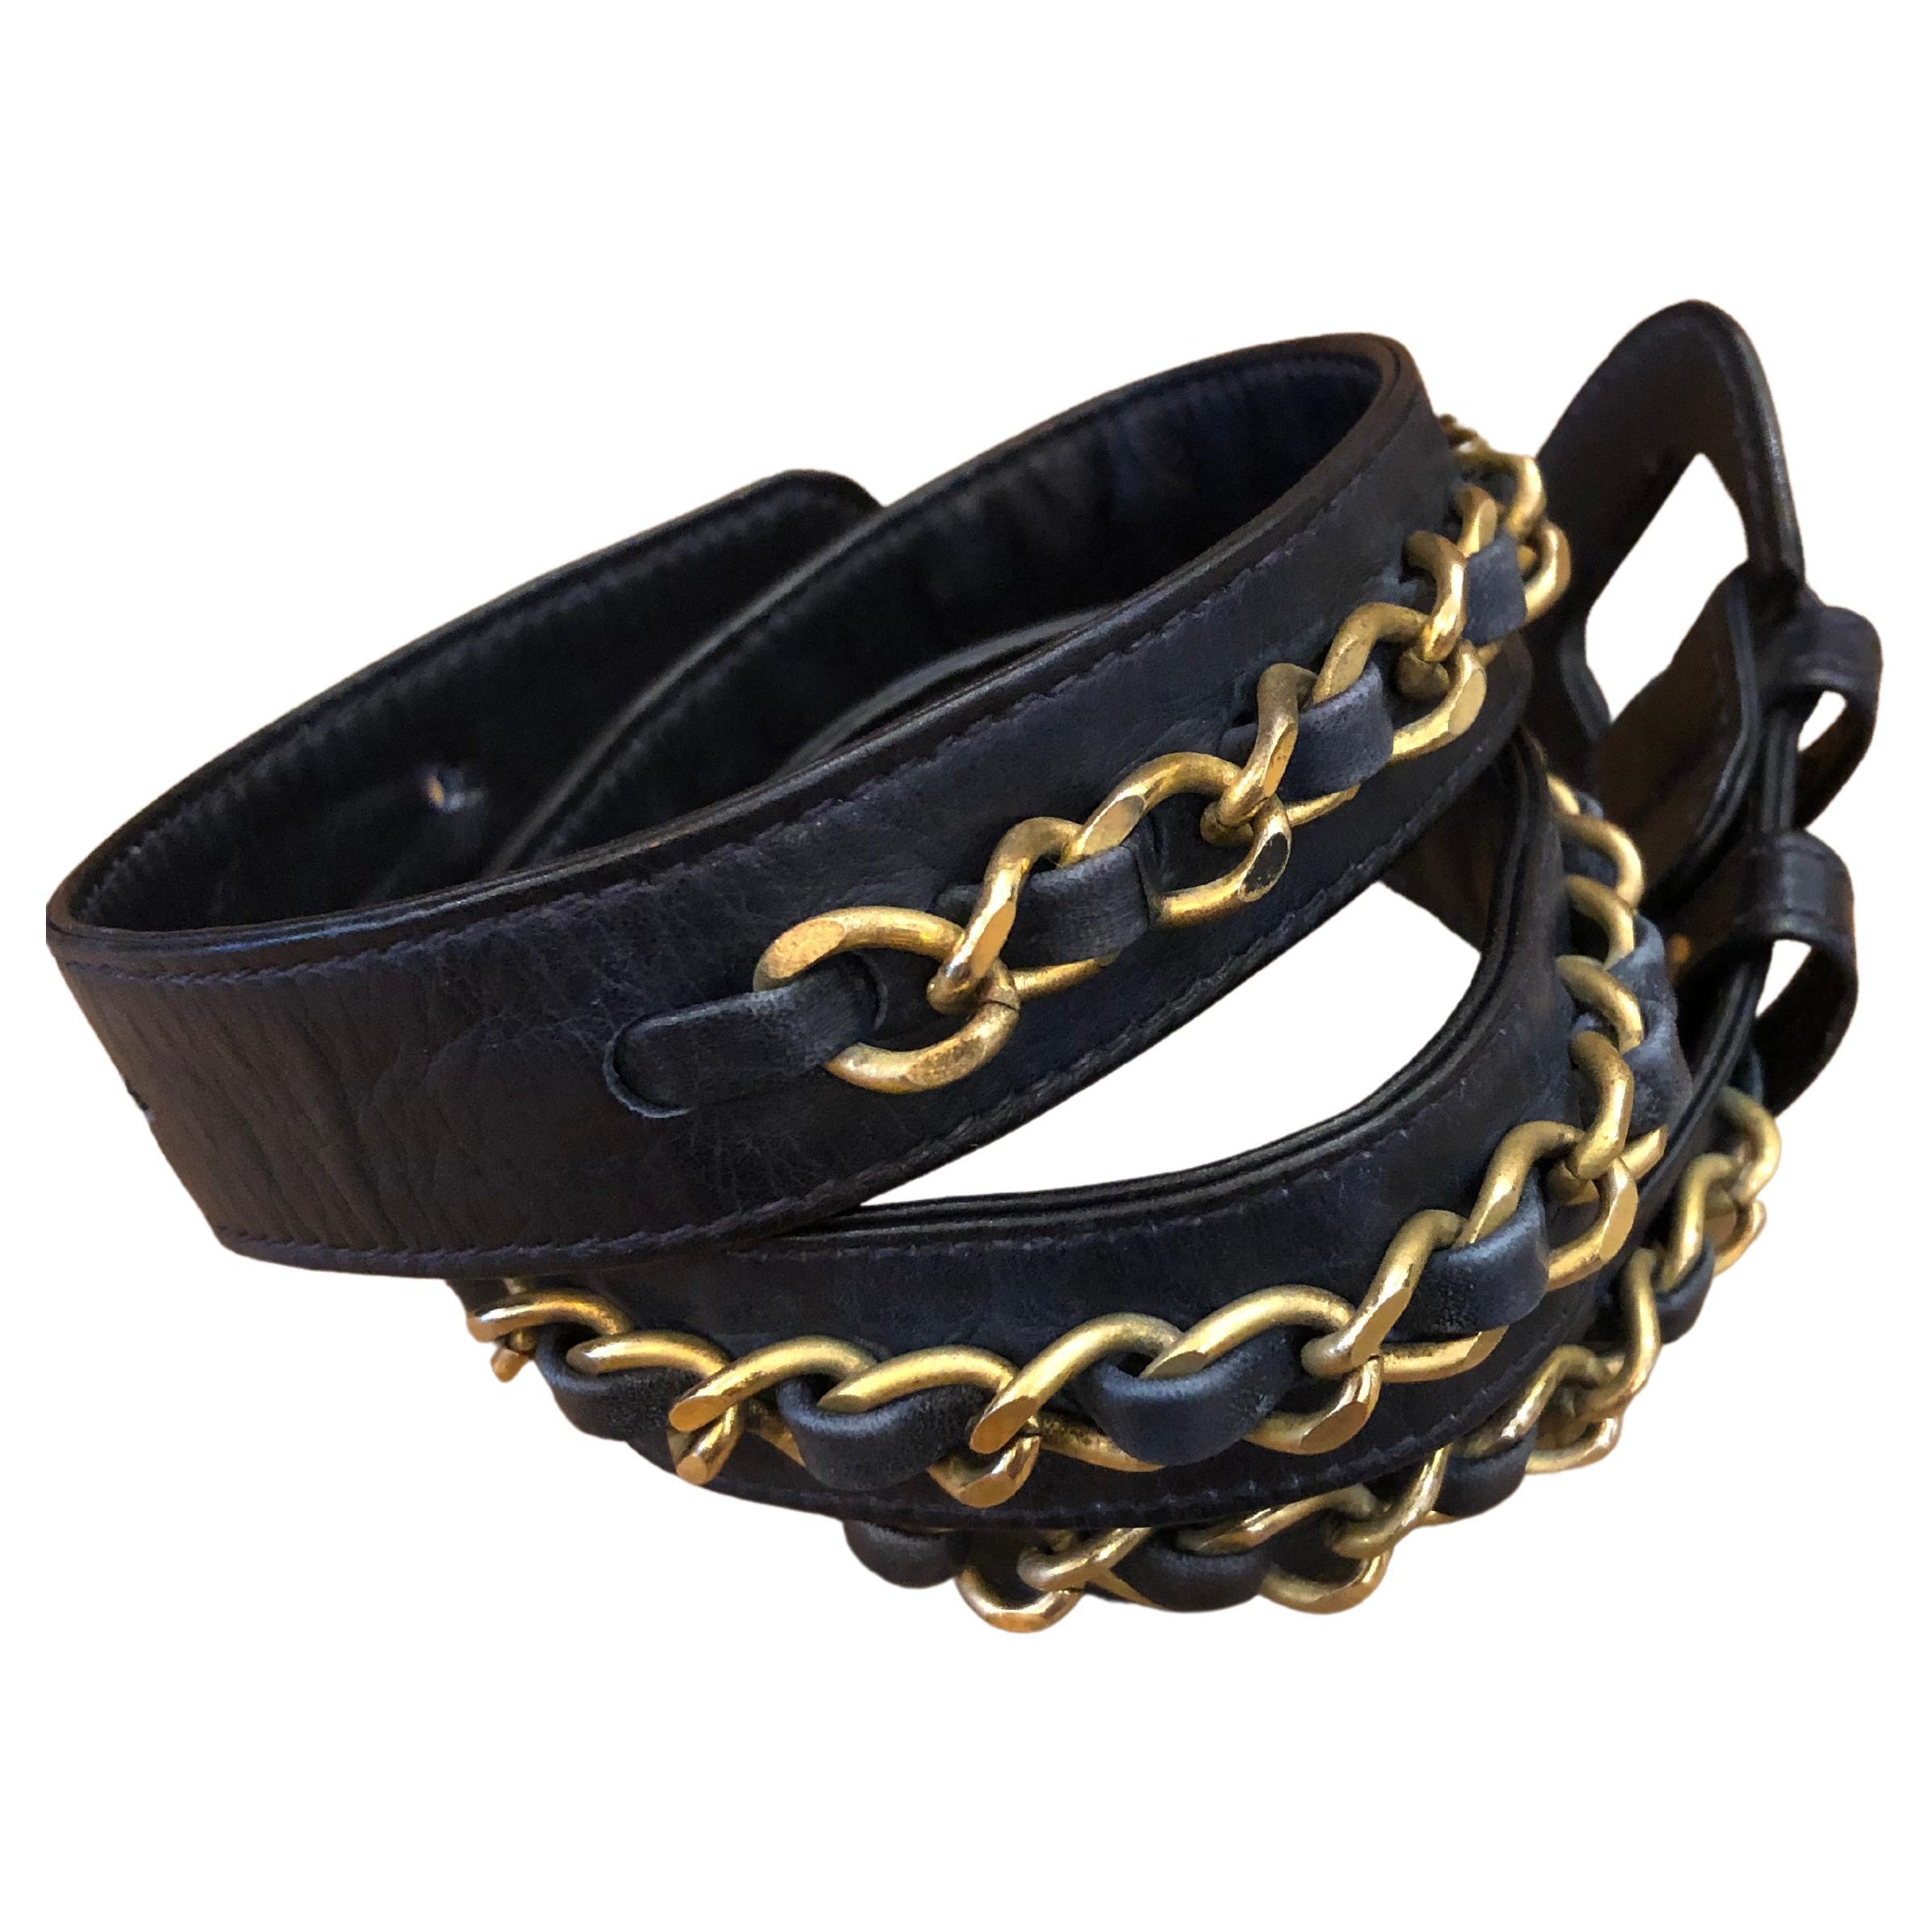 This vintage Chanel belt is crafted of lambskin leather in navy and gold tone chain interlaced with the same leather. It once belonged to a vintage Chanel belt bag. Stamped CHANEL made in France. Adjustable buckle fastening with three holes. Size